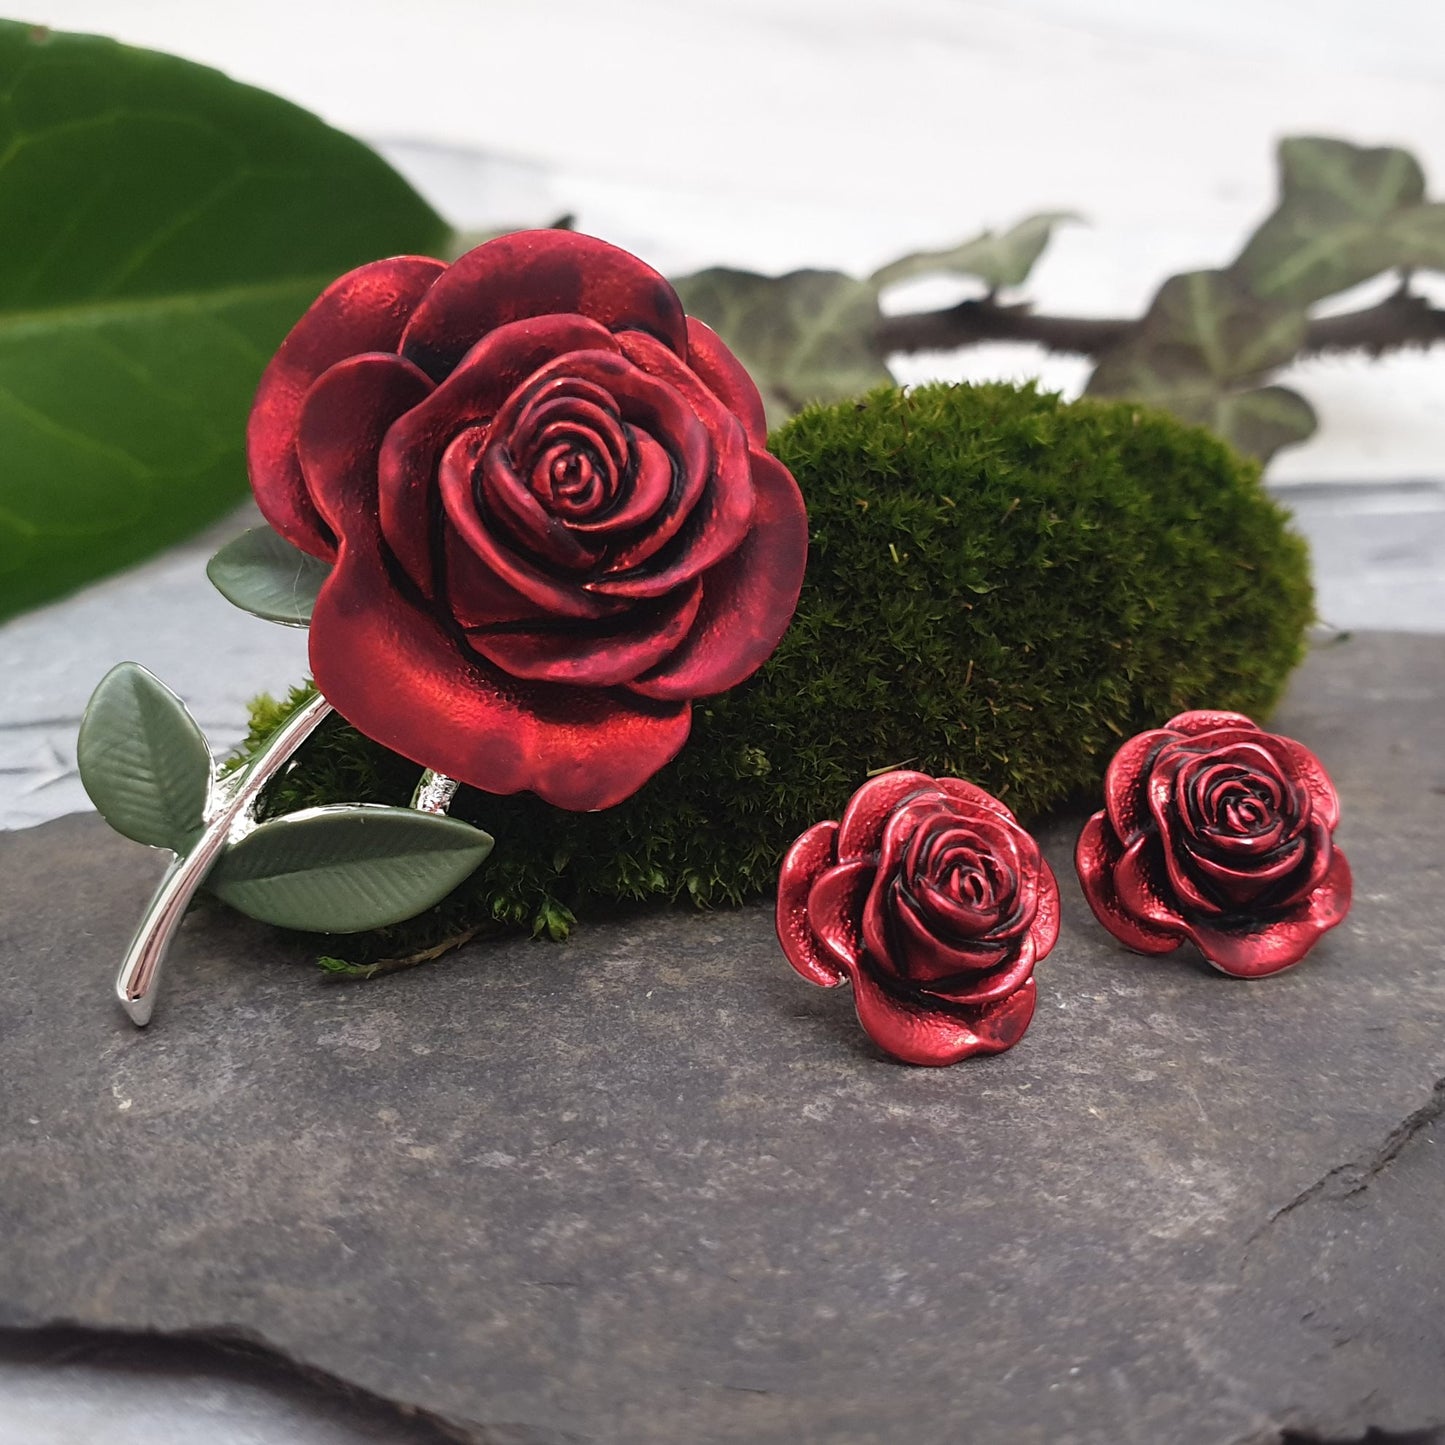 Matching Red Rose stud earrings and brooch.